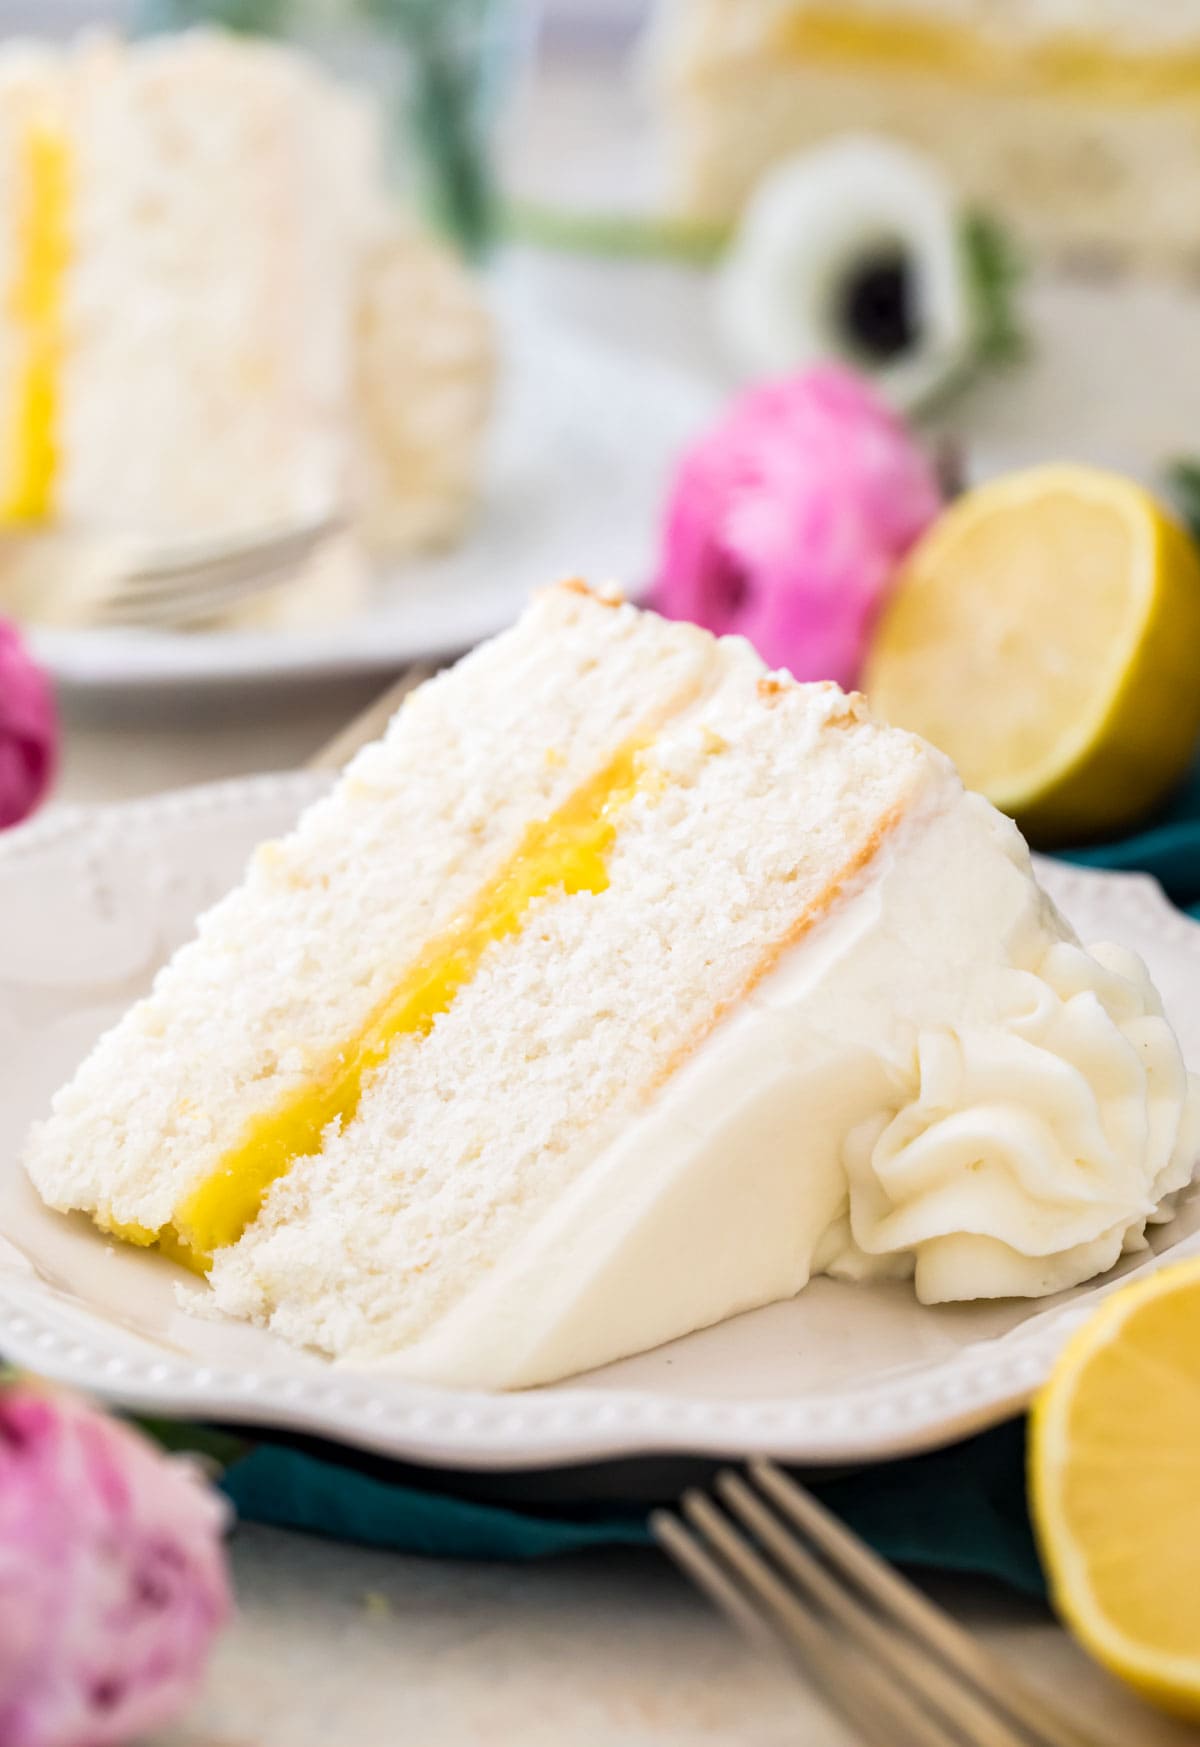 slice of homemade lemon cake filled with lemon curd and iced with a whipped cream cheese frosting